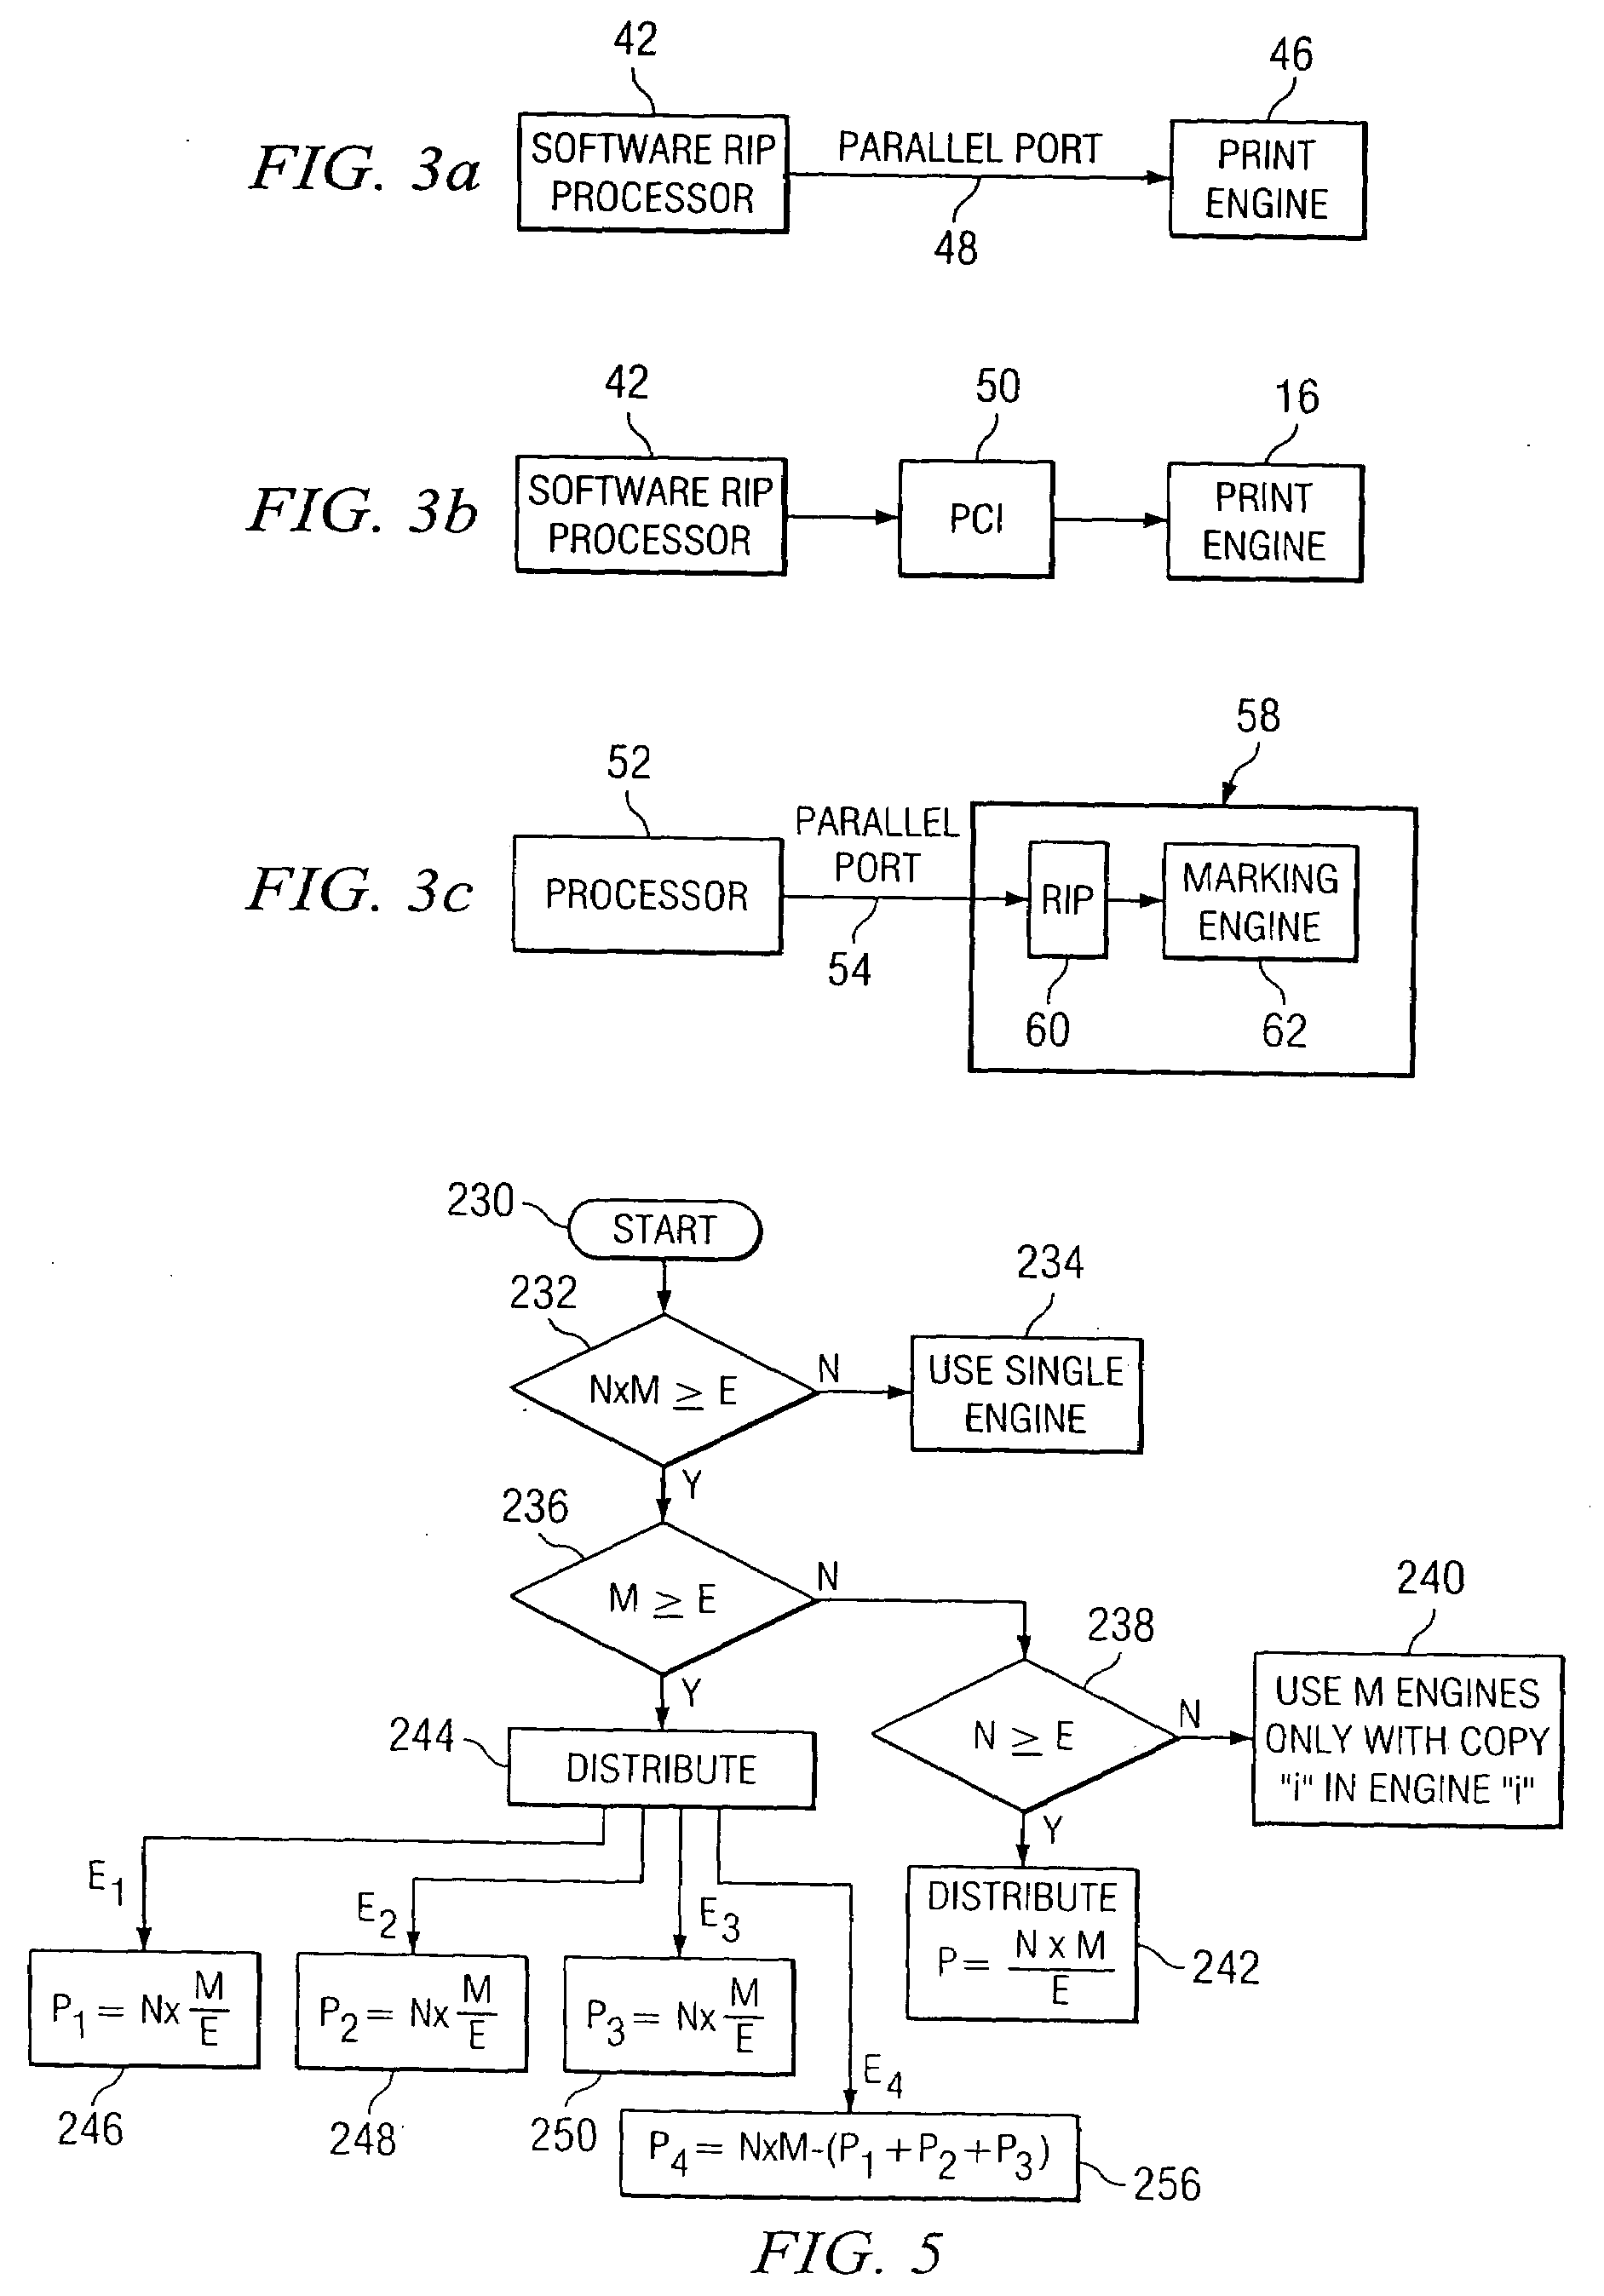 Method and apparatus for routing pages to printers in a multi-print engine as a function of print job parameters